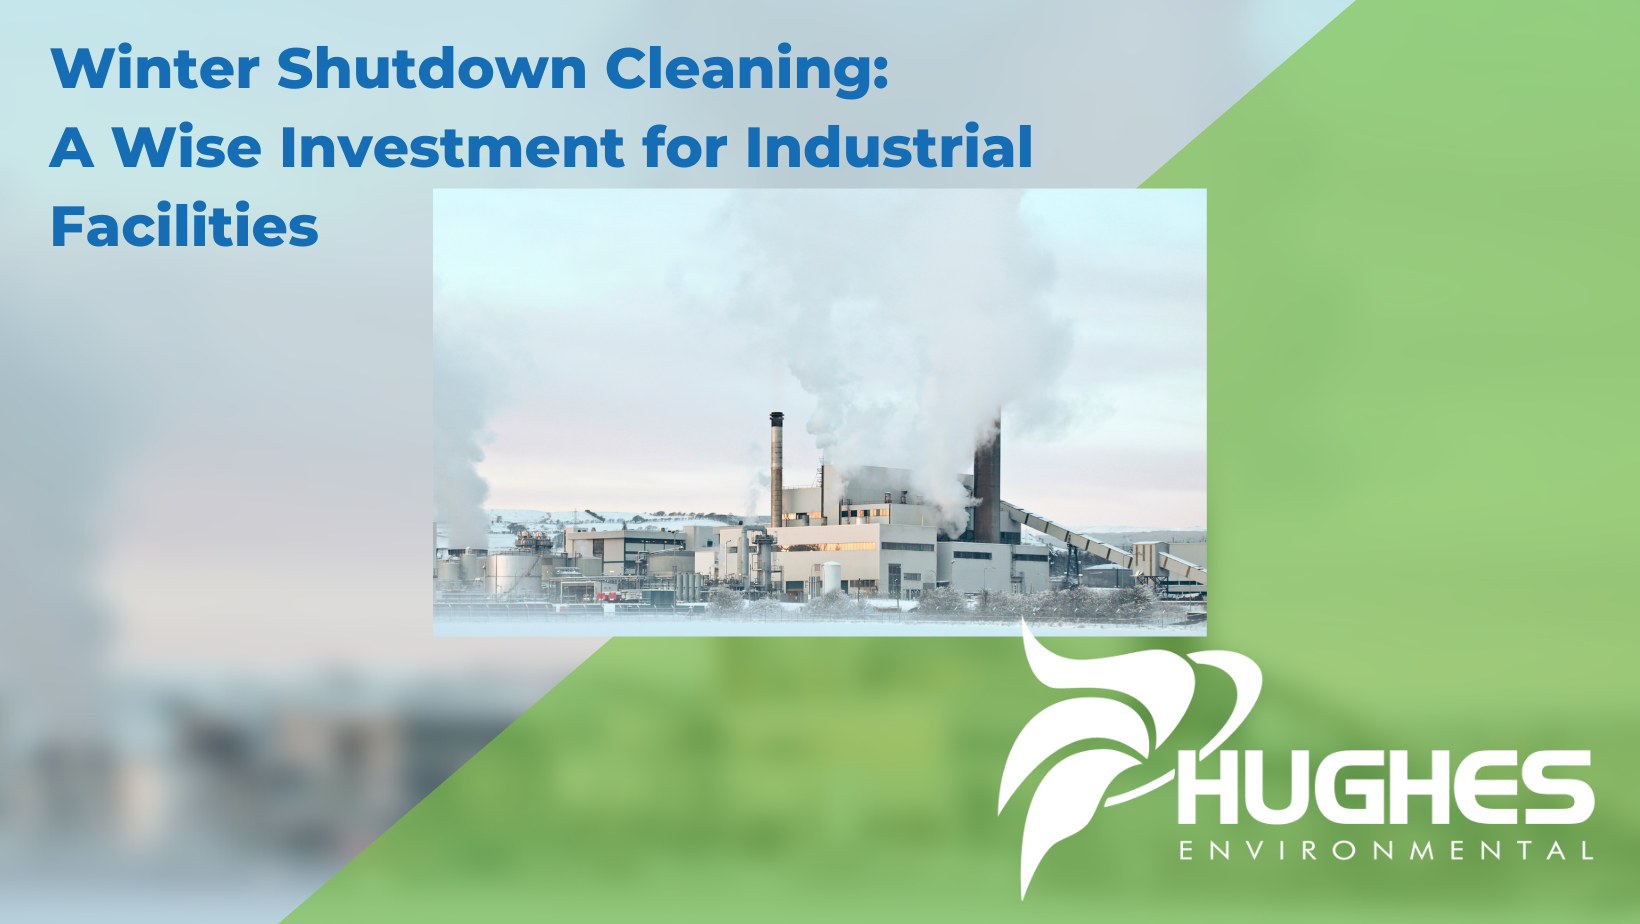 Winter Shutdown Cleaning A Wise Investment for Industrial Facilities